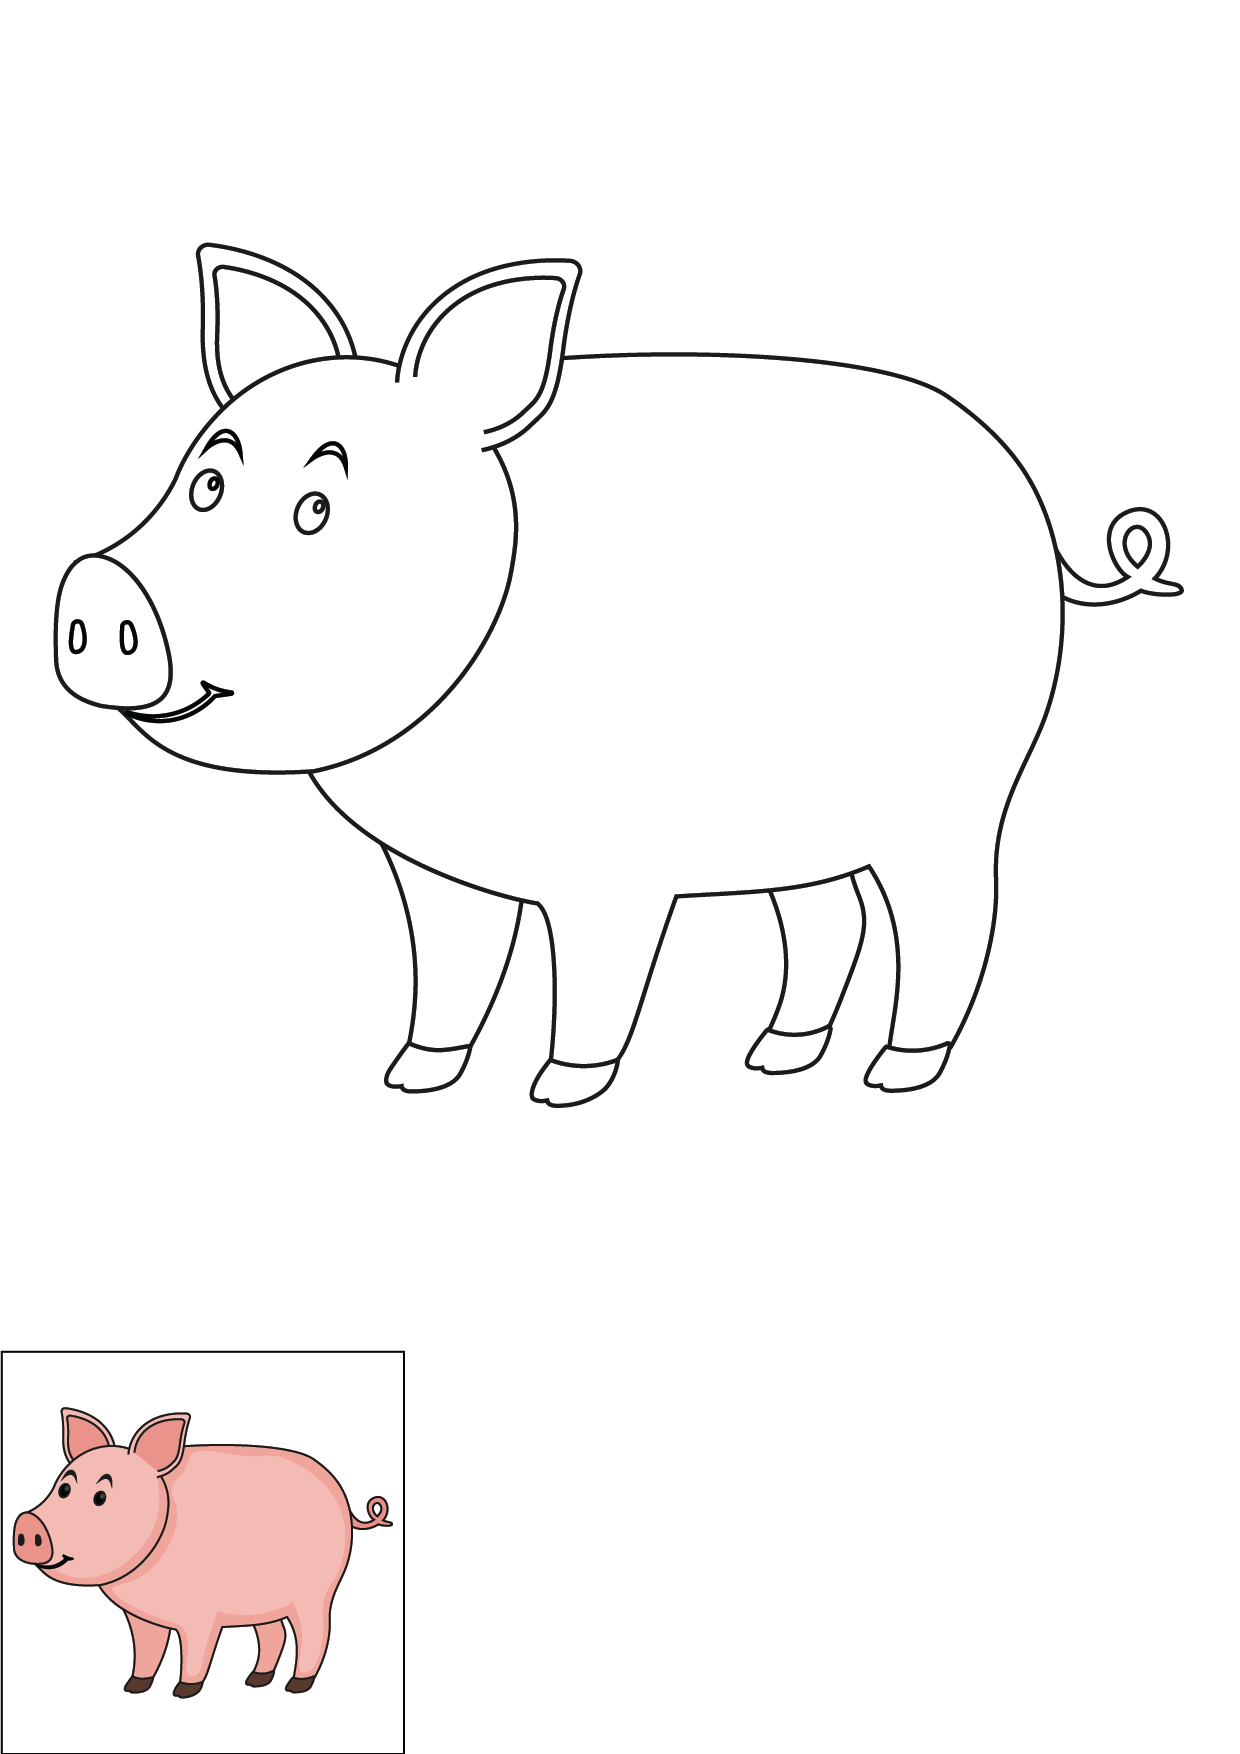 How to Draw A Pig Step by Step Printable Color